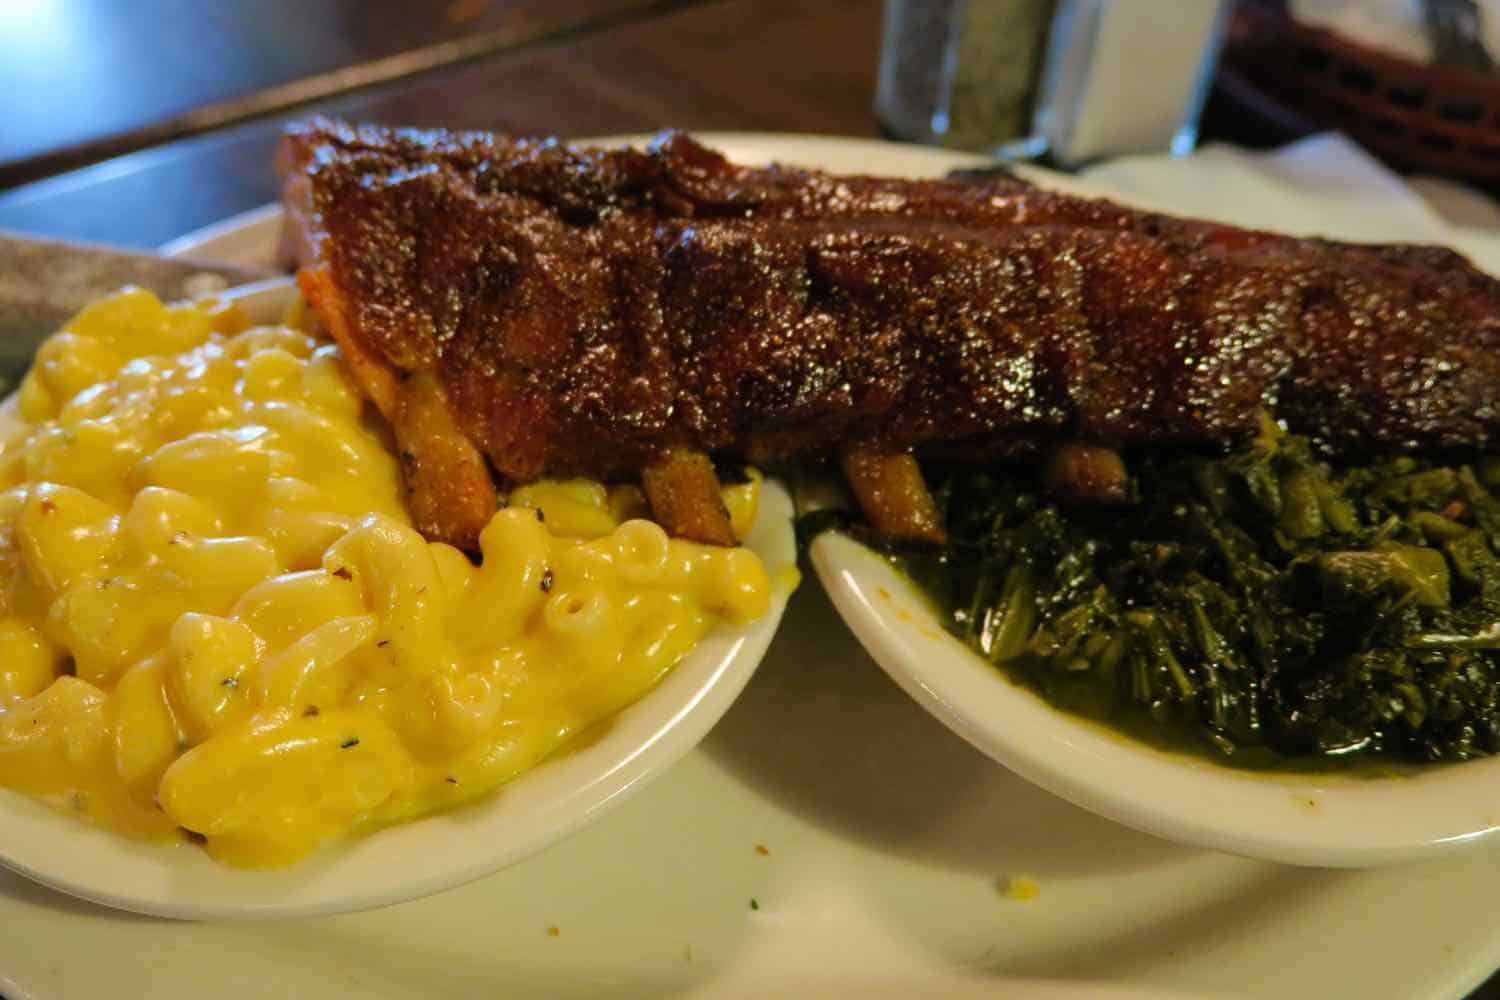 Barbecue ribs sitting on a small bowl of macaroni and cheese and a small bowl of turnip greens